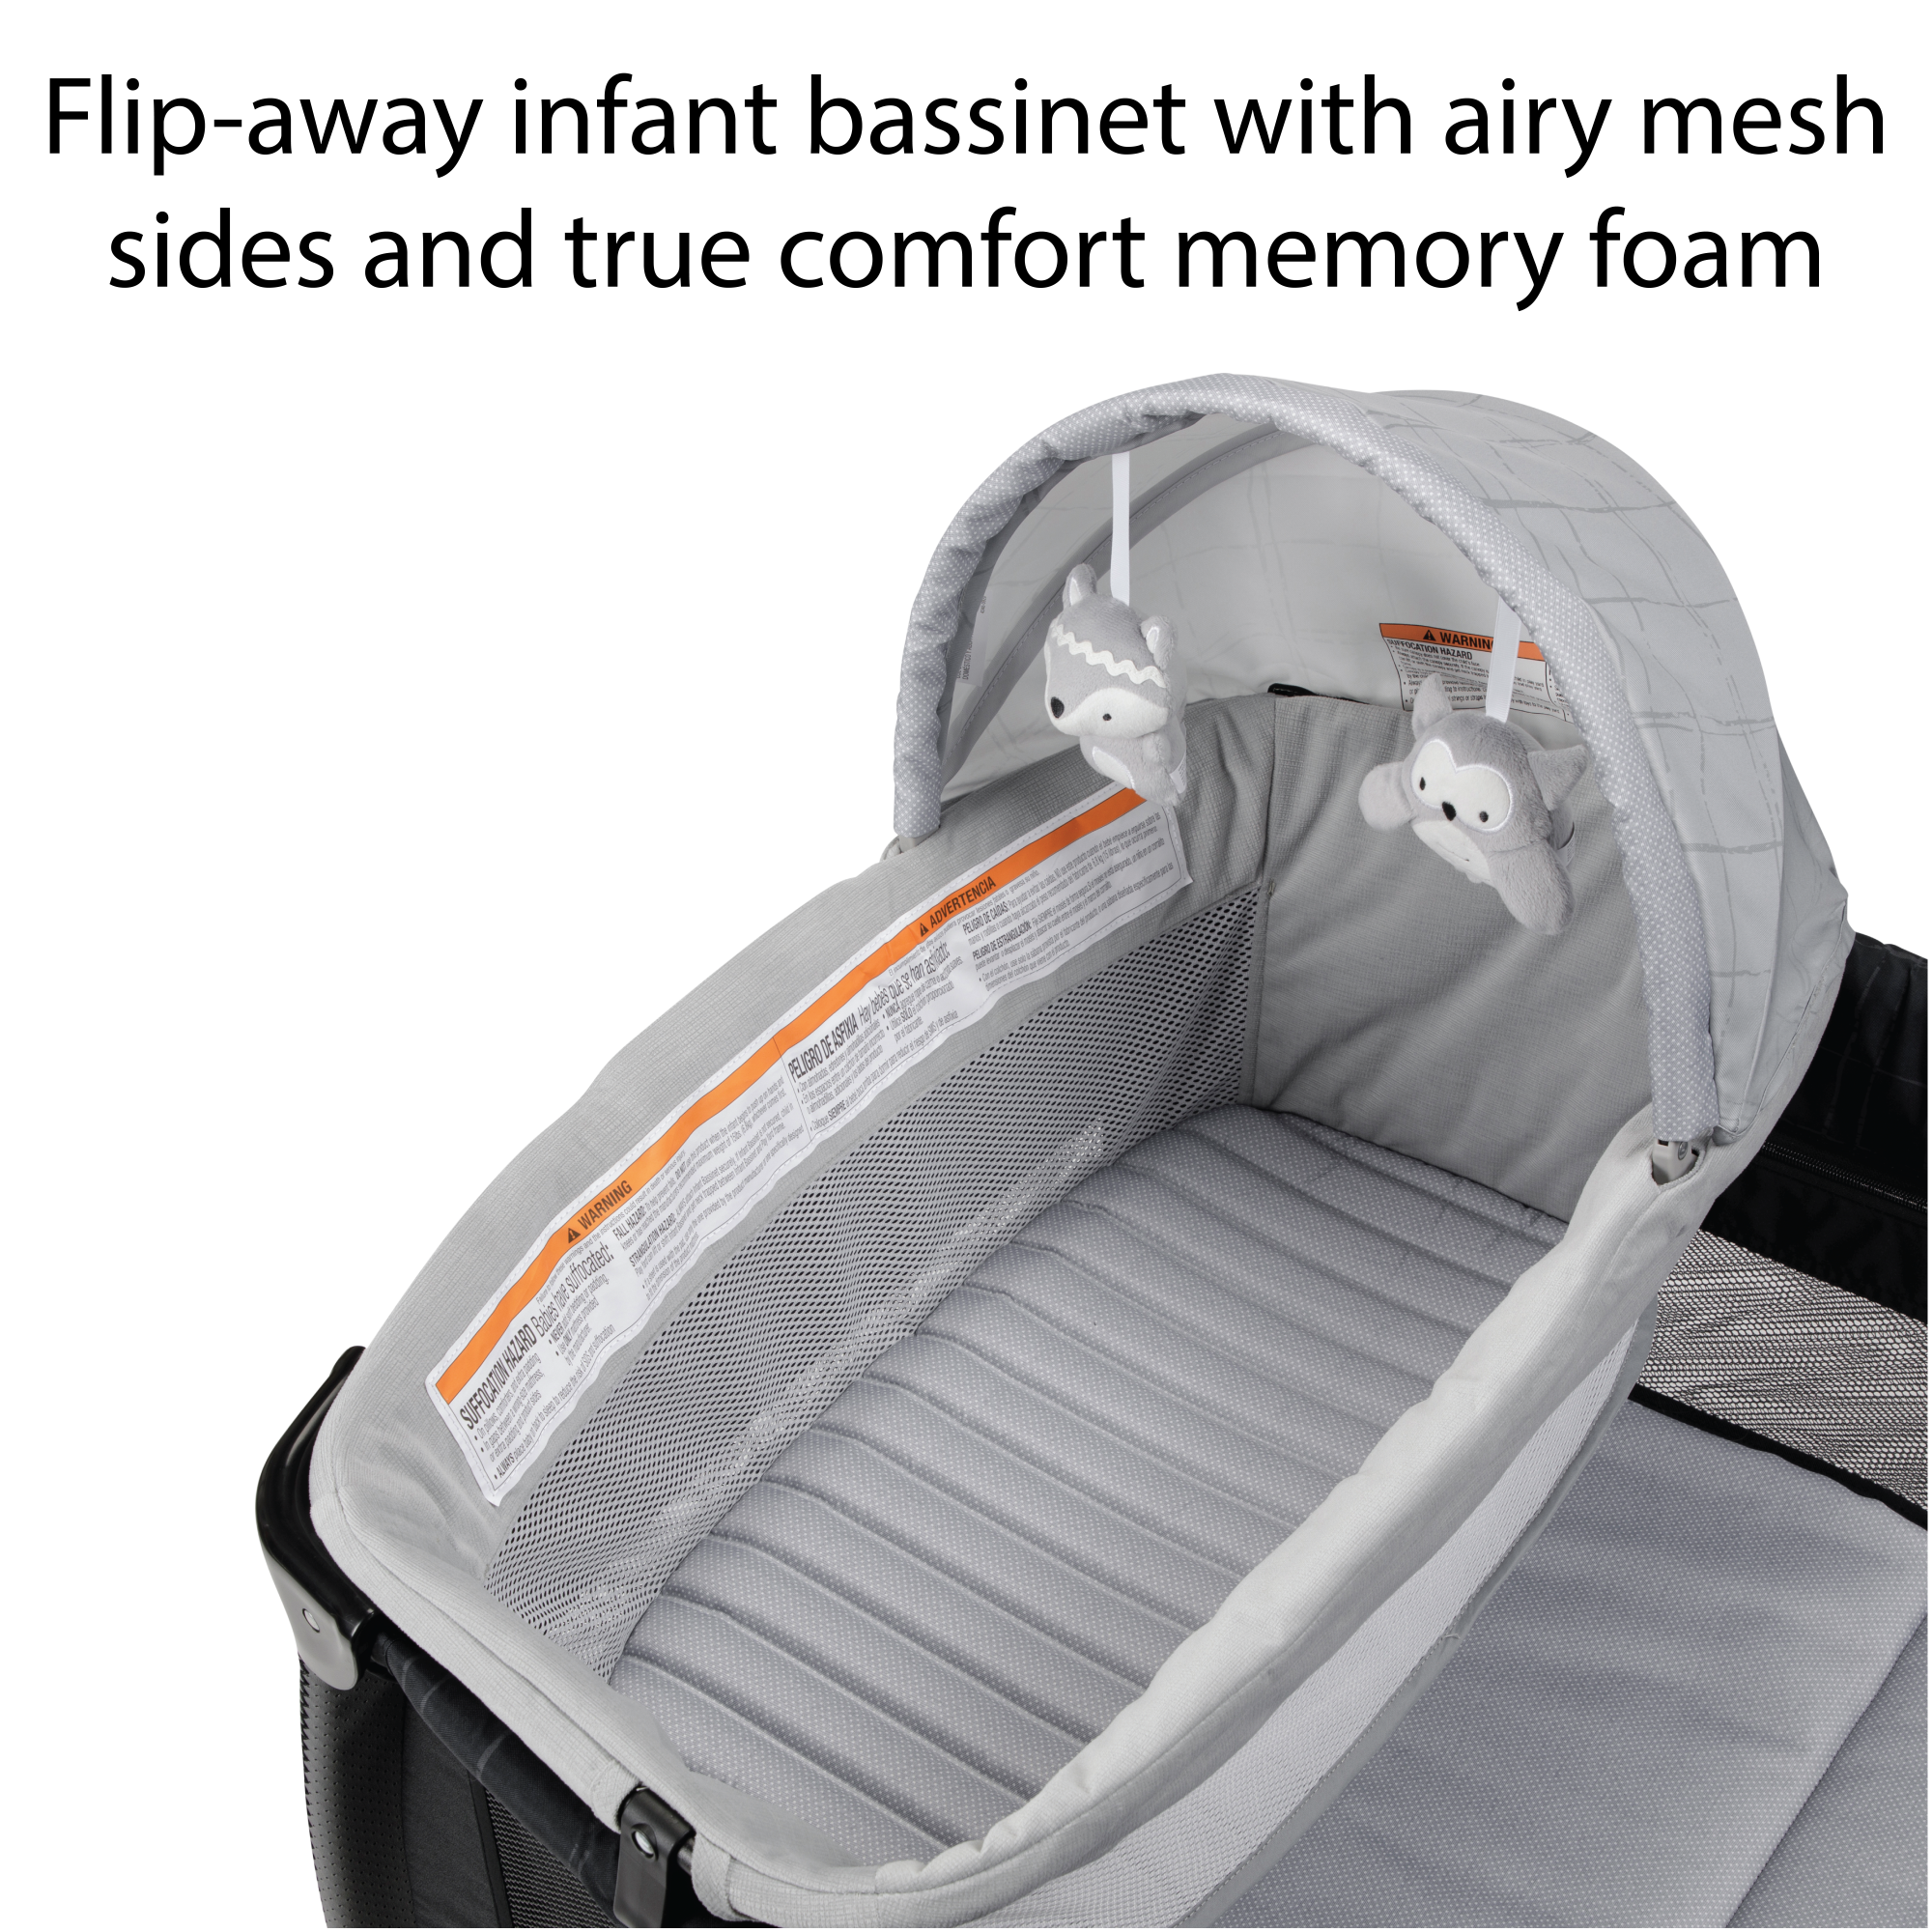 Play-and-Stay Play Yard - flip-away infant bassinet with airy mesh sides and true comfort memory foam